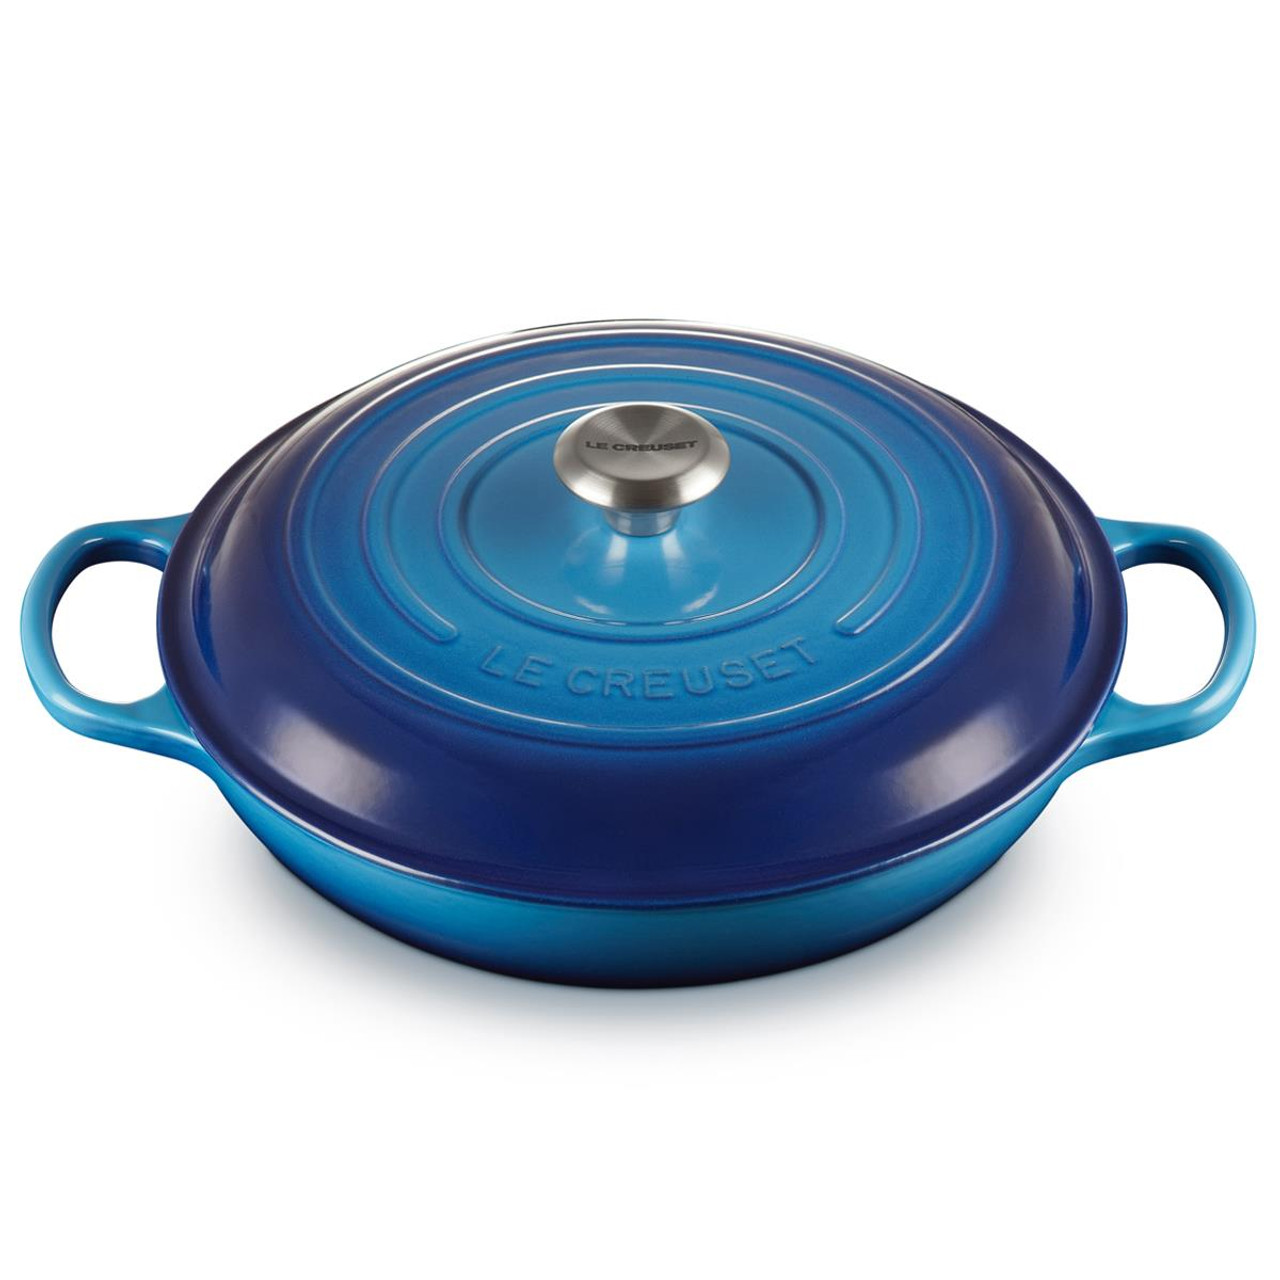 What role does the tight lid play in the Le Creuset shallow casserole?